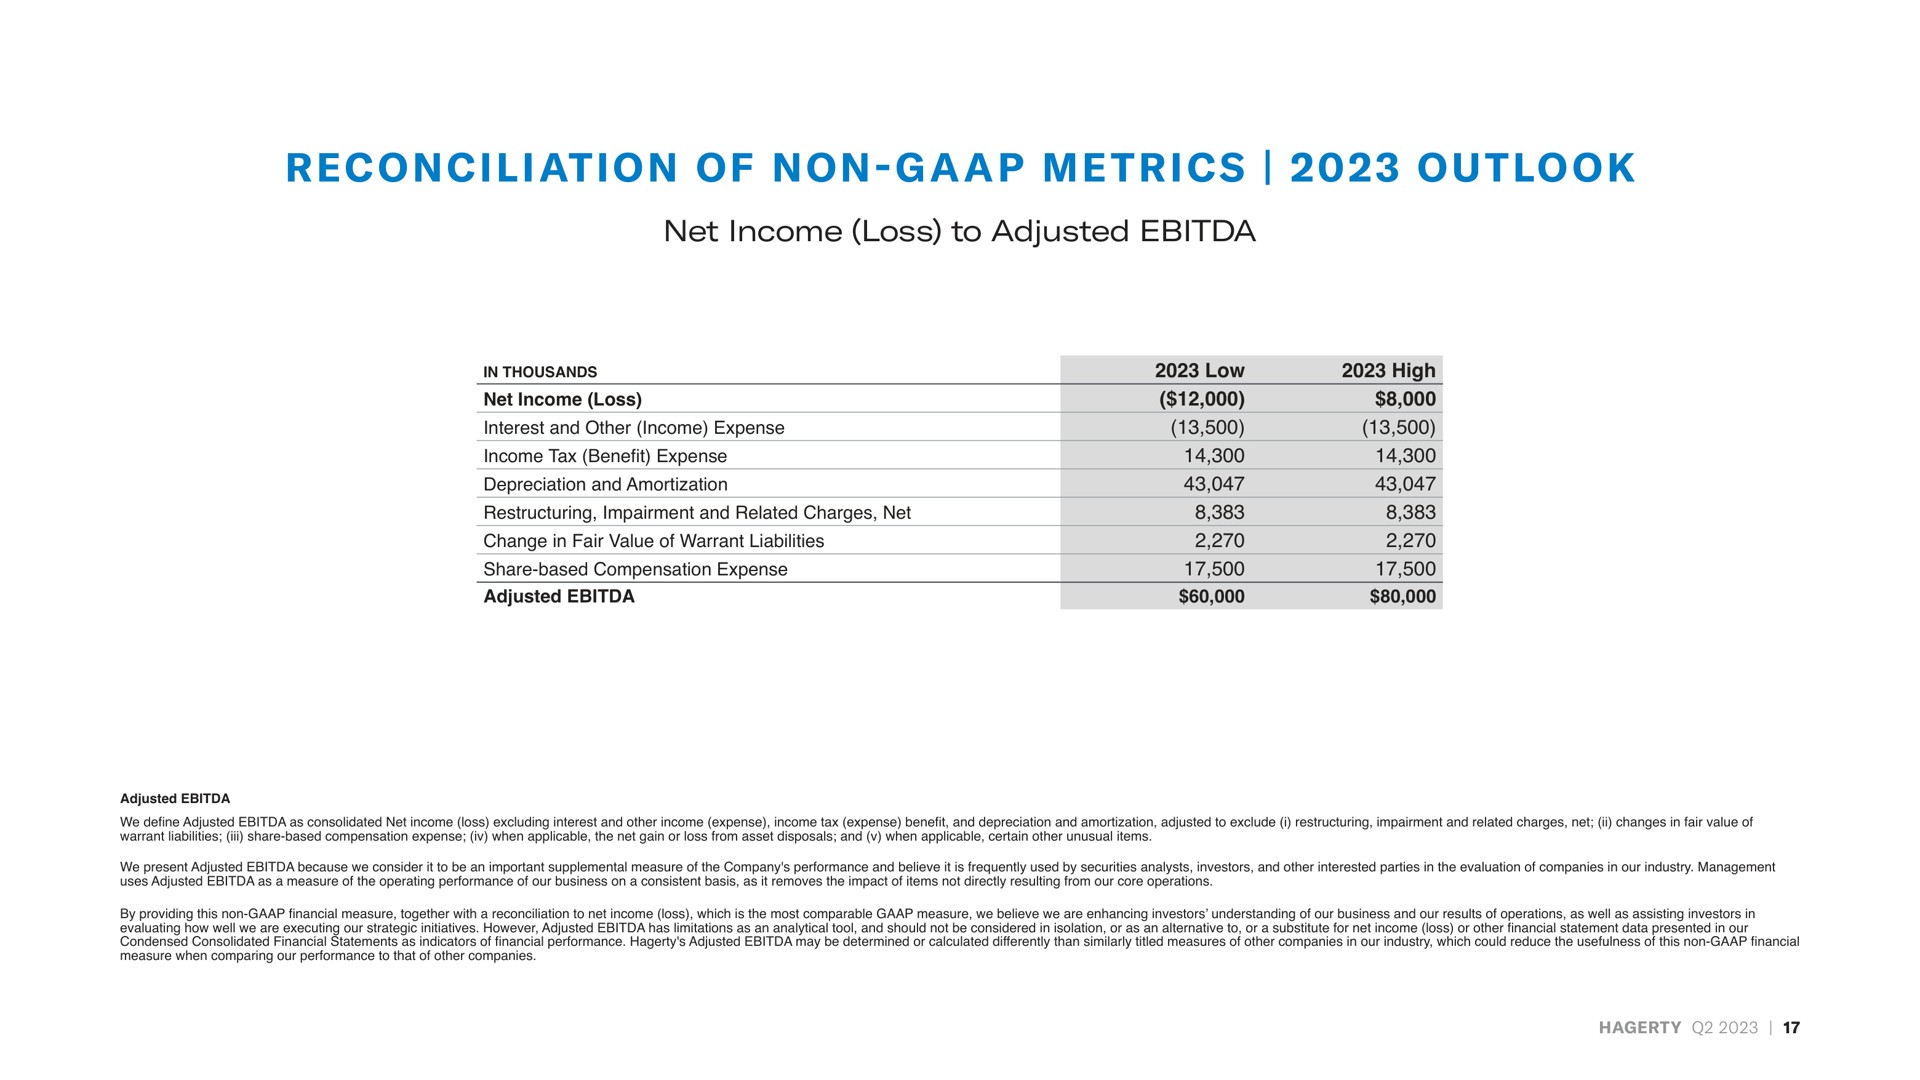 on ion of non a a i net income loss to adjusted reconciliation non metrics outlook | Hagerty